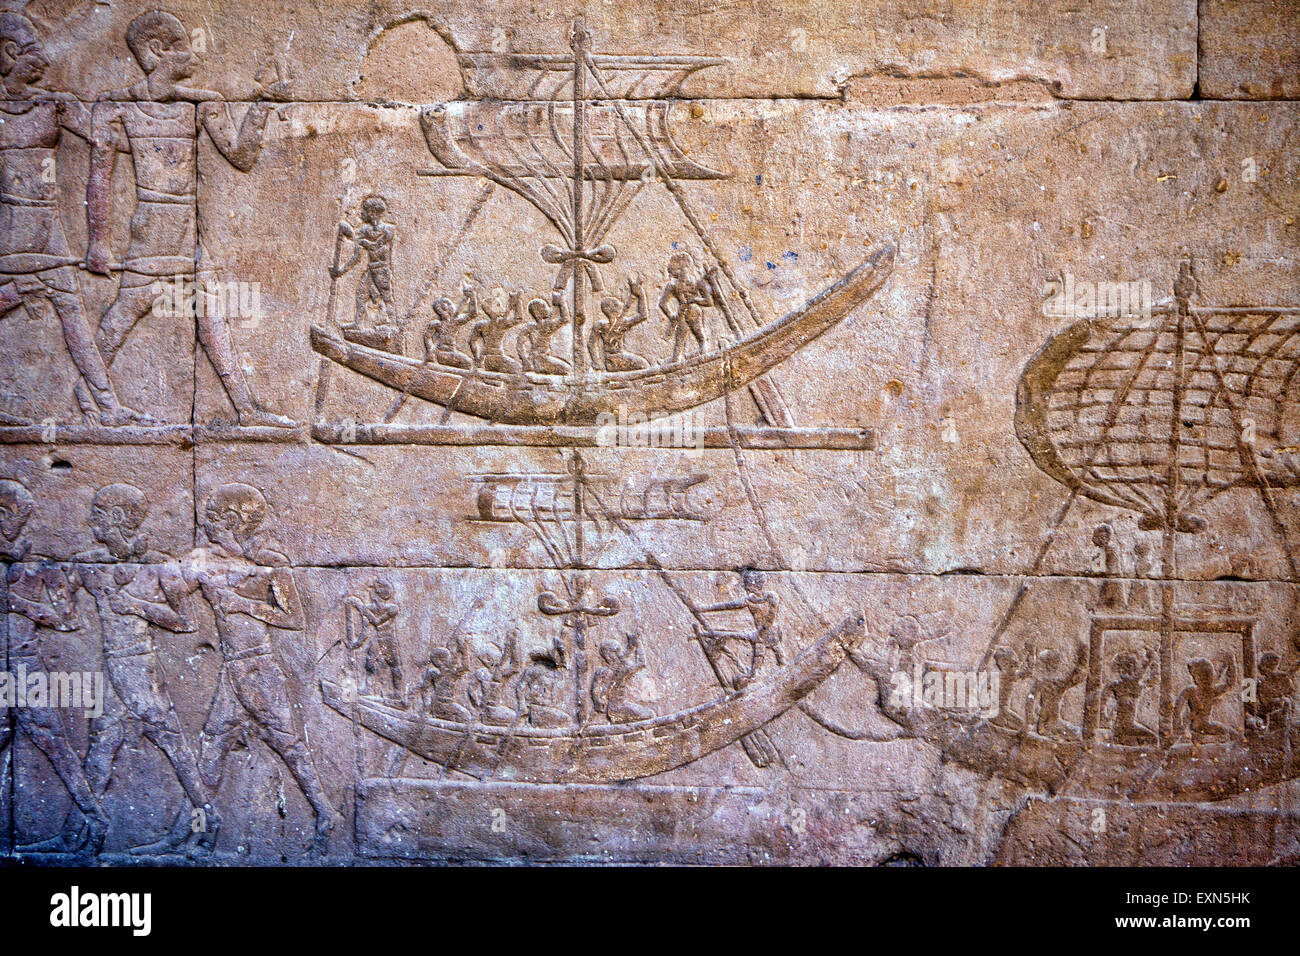 Ancient carvings of boats filled with people on the walls found at the temple of Idfu in Egypt. Stock Photo